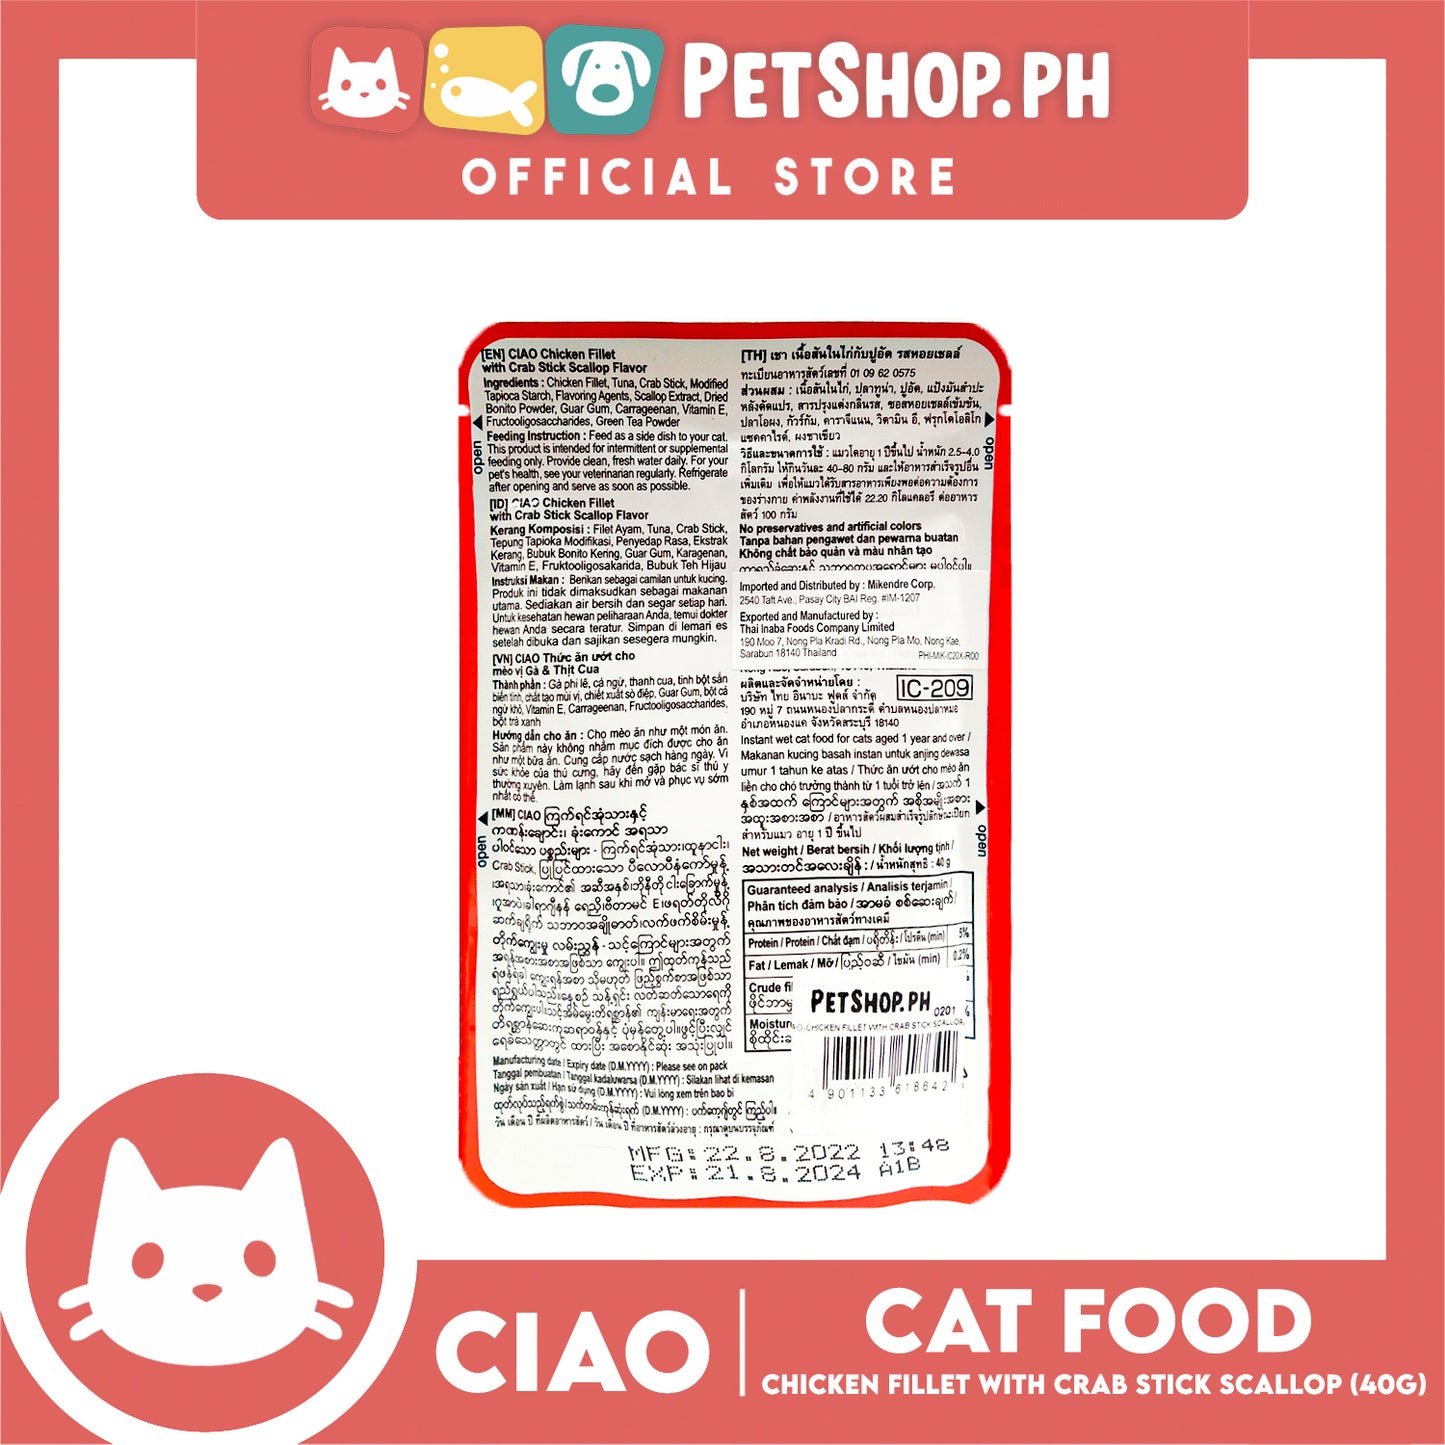 Ciao Chicken Fillet With Crab Stick Scallop Flavor 40g (IC-209) Cat Wet Food